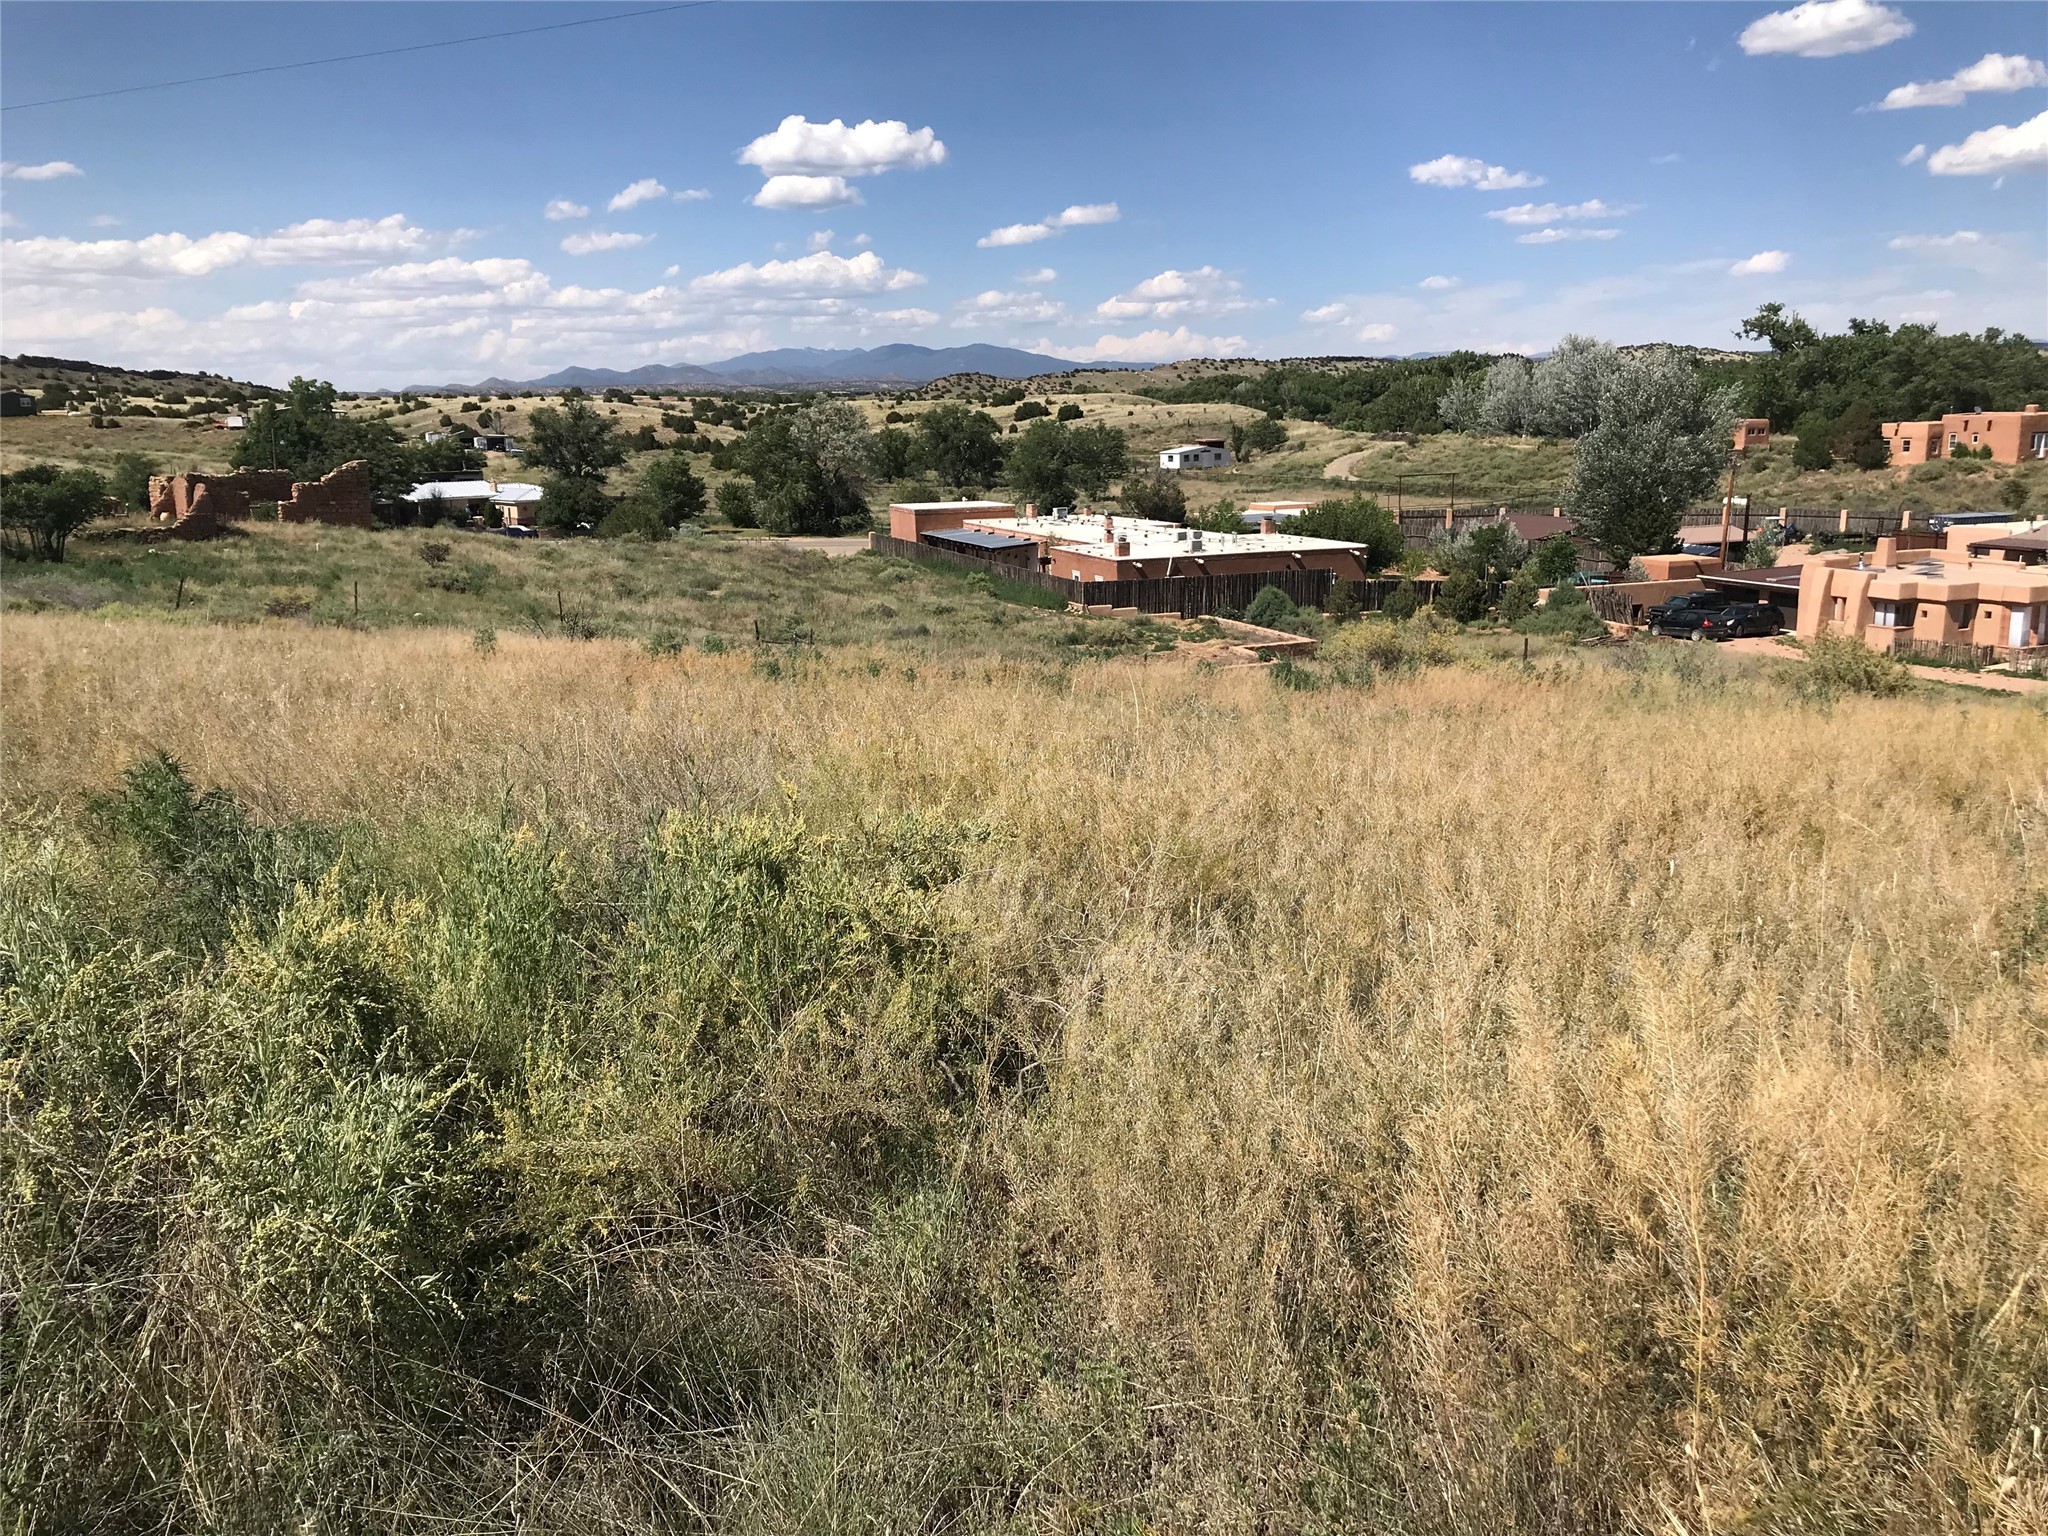 17 The Hill, Lamy, New Mexico 87540, ,Land,For Sale,17 The Hill,202341232